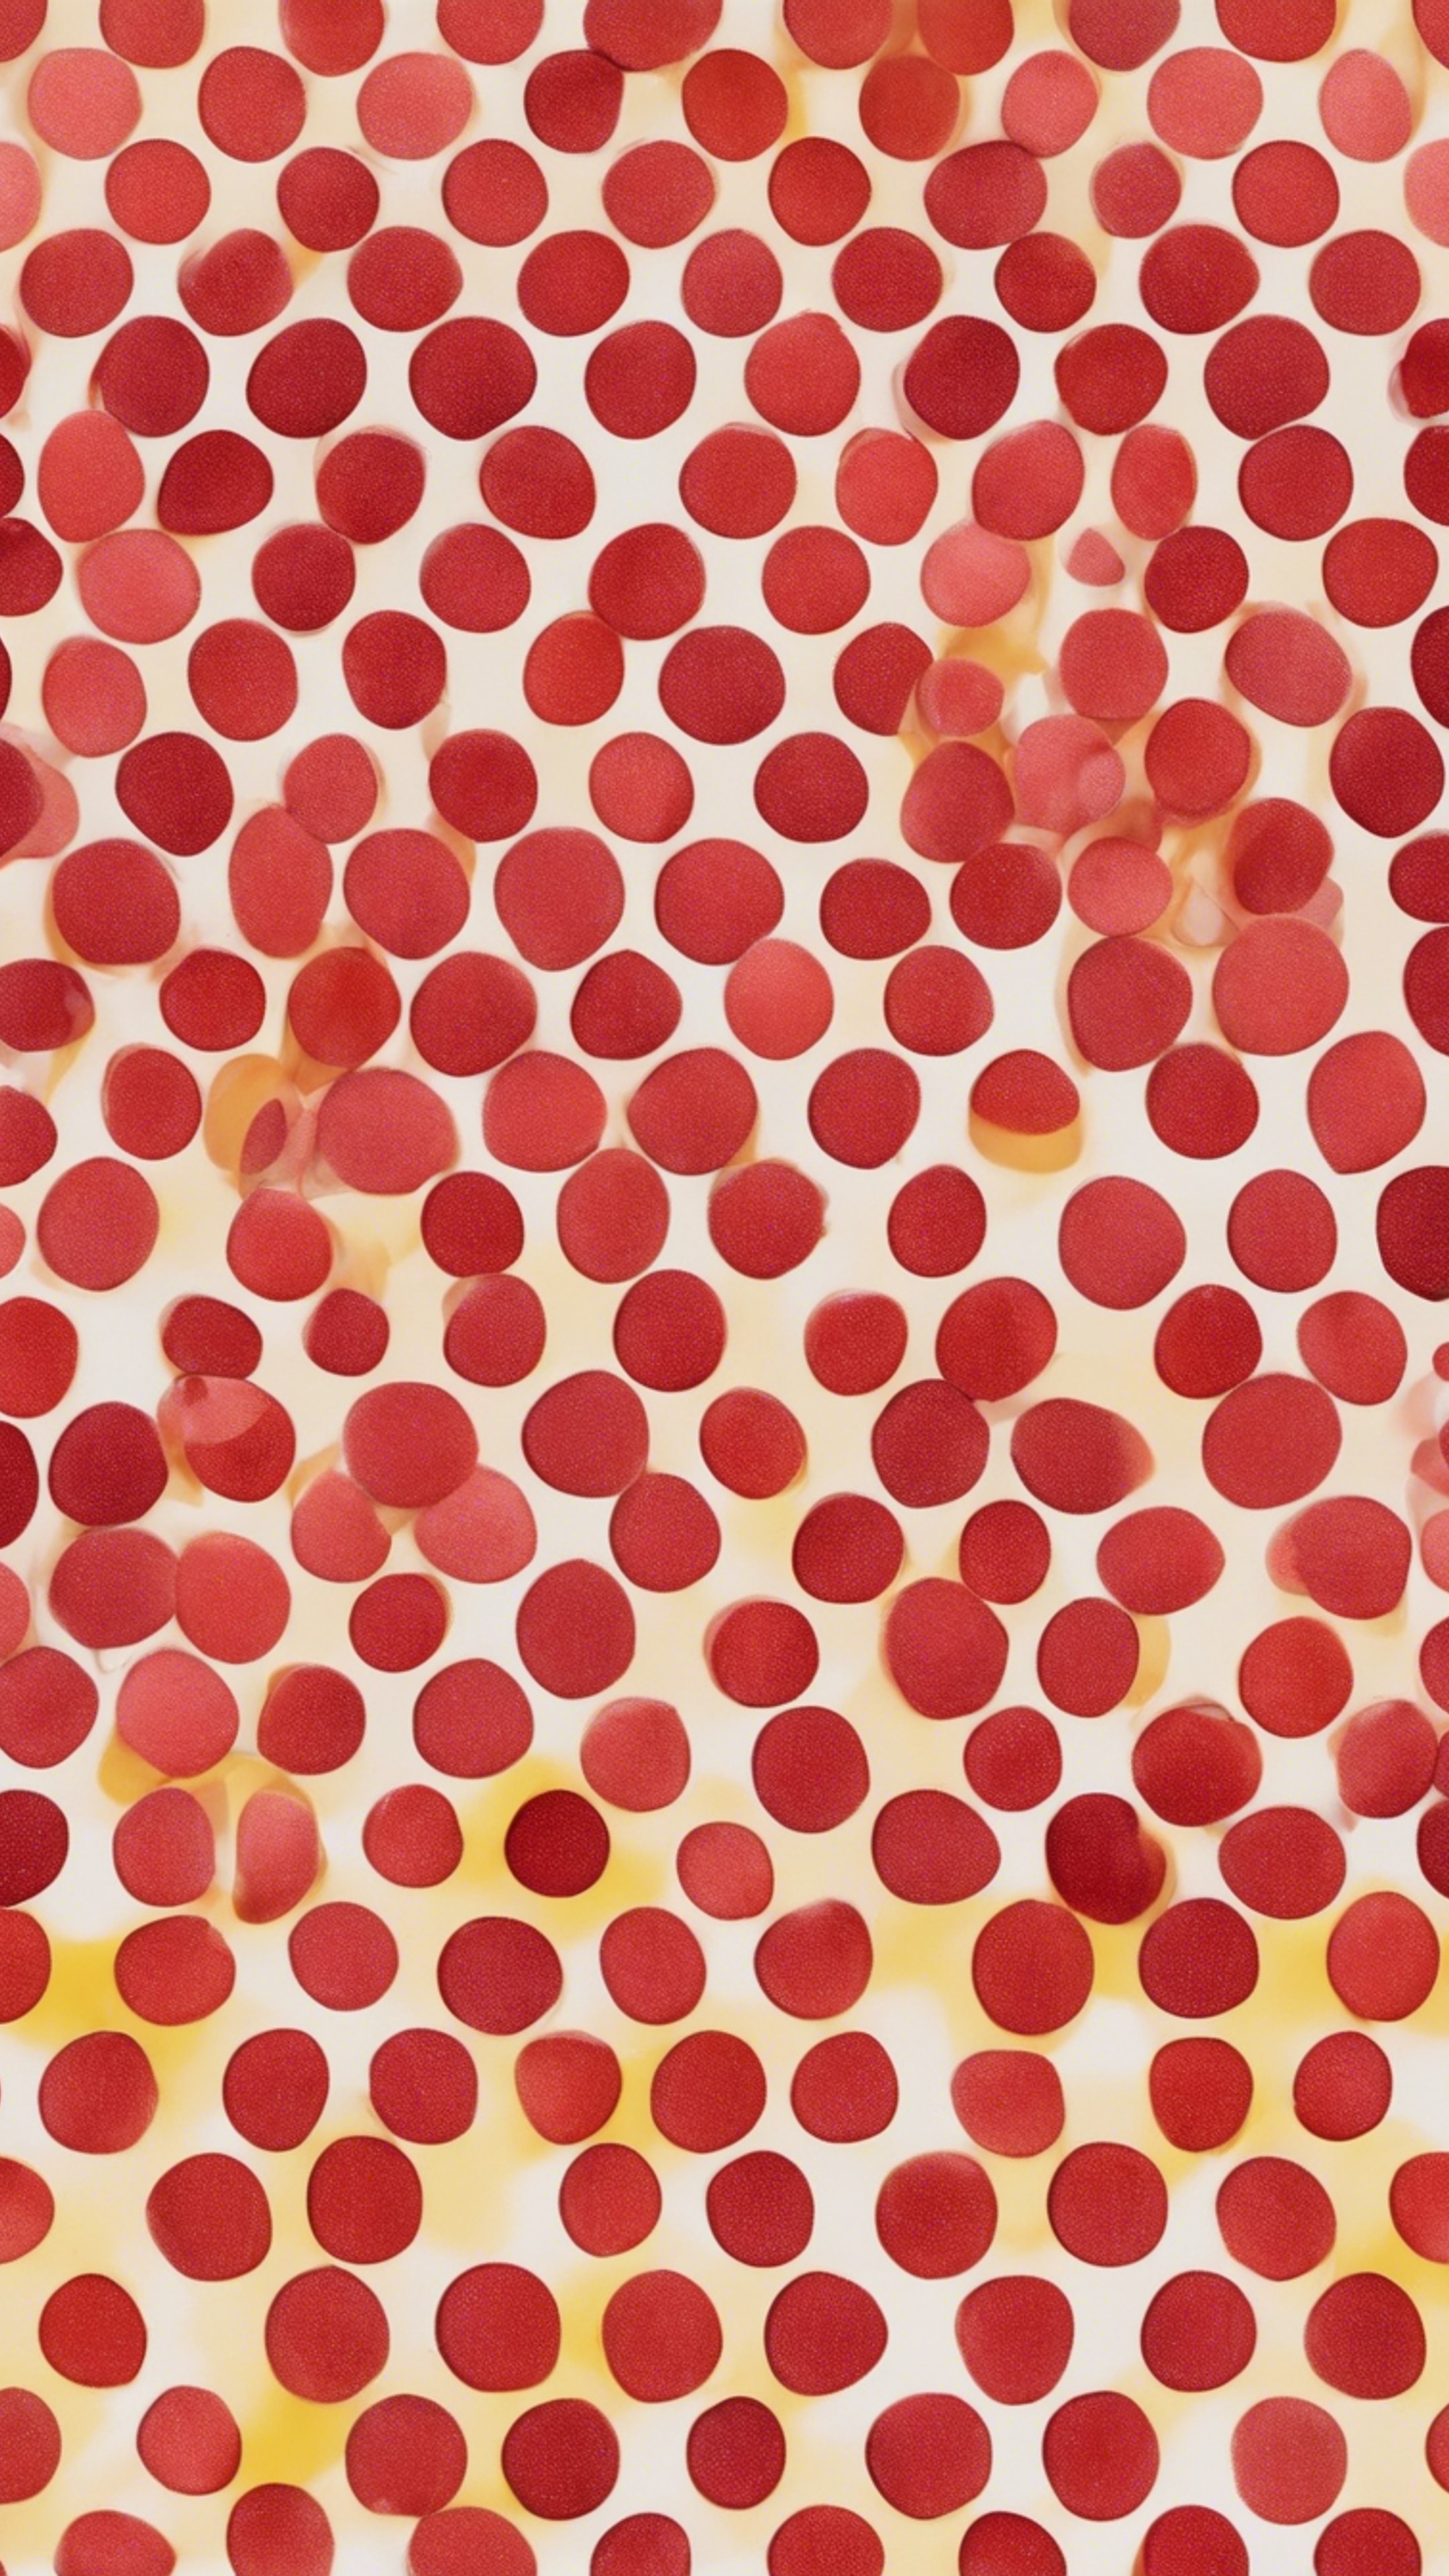 Red polka dots clashing beautifully with yellow ones, all over the seamless canvas. کاغذ دیواری[6845ea3f5aaf42daa07d]